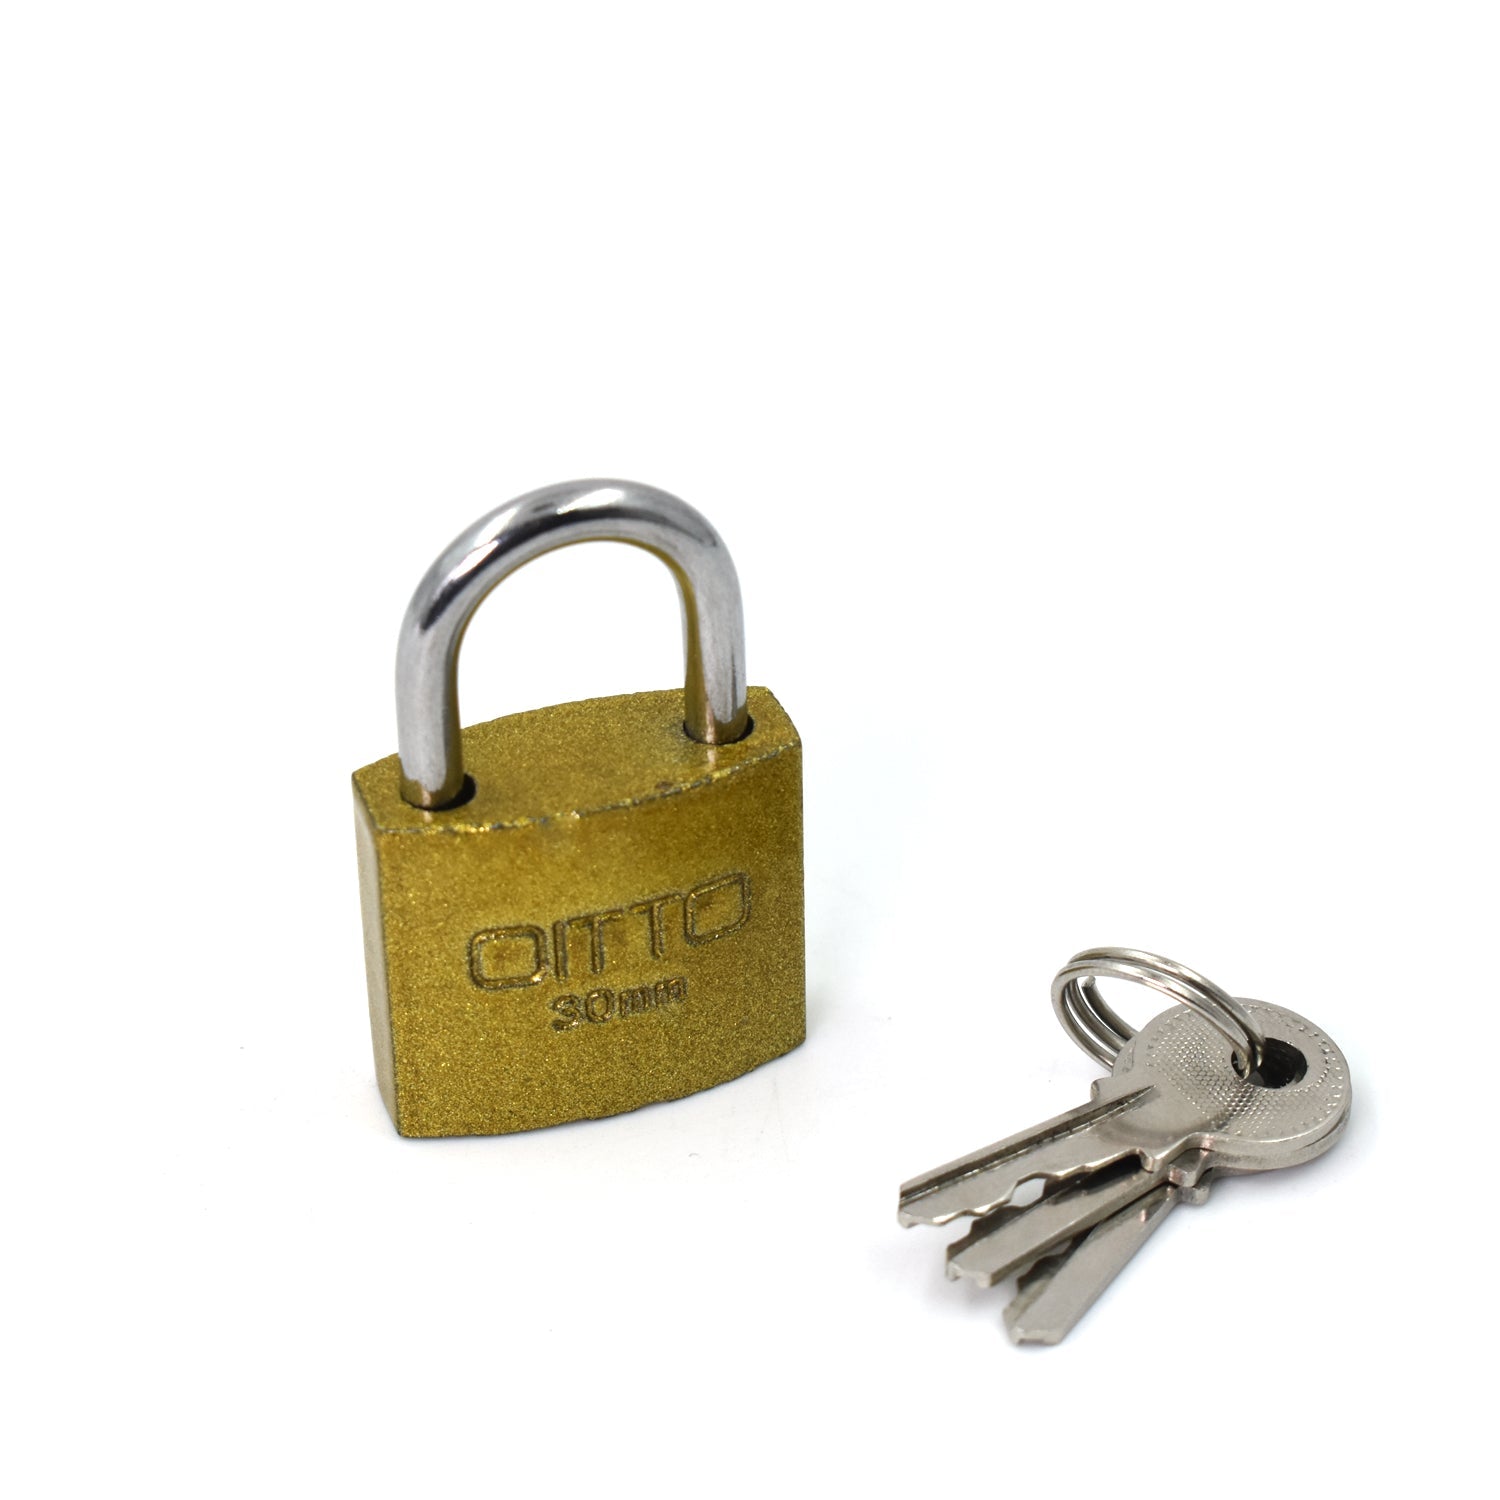 9034 30 Mm Lock N Key Used For Security Purposes In Important Places.